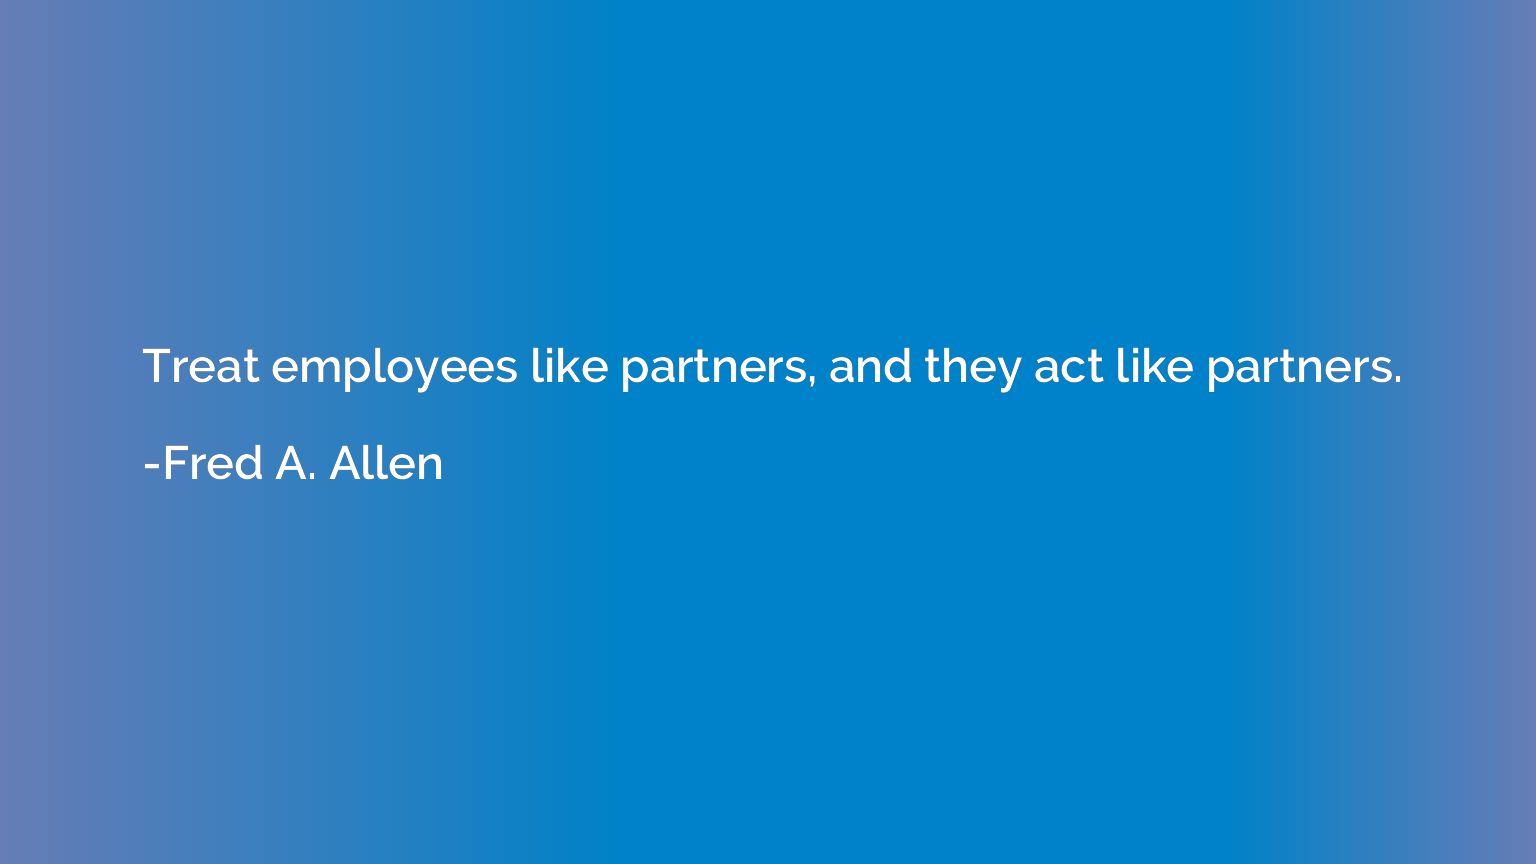 Treat employees like partners, and they act like partners.